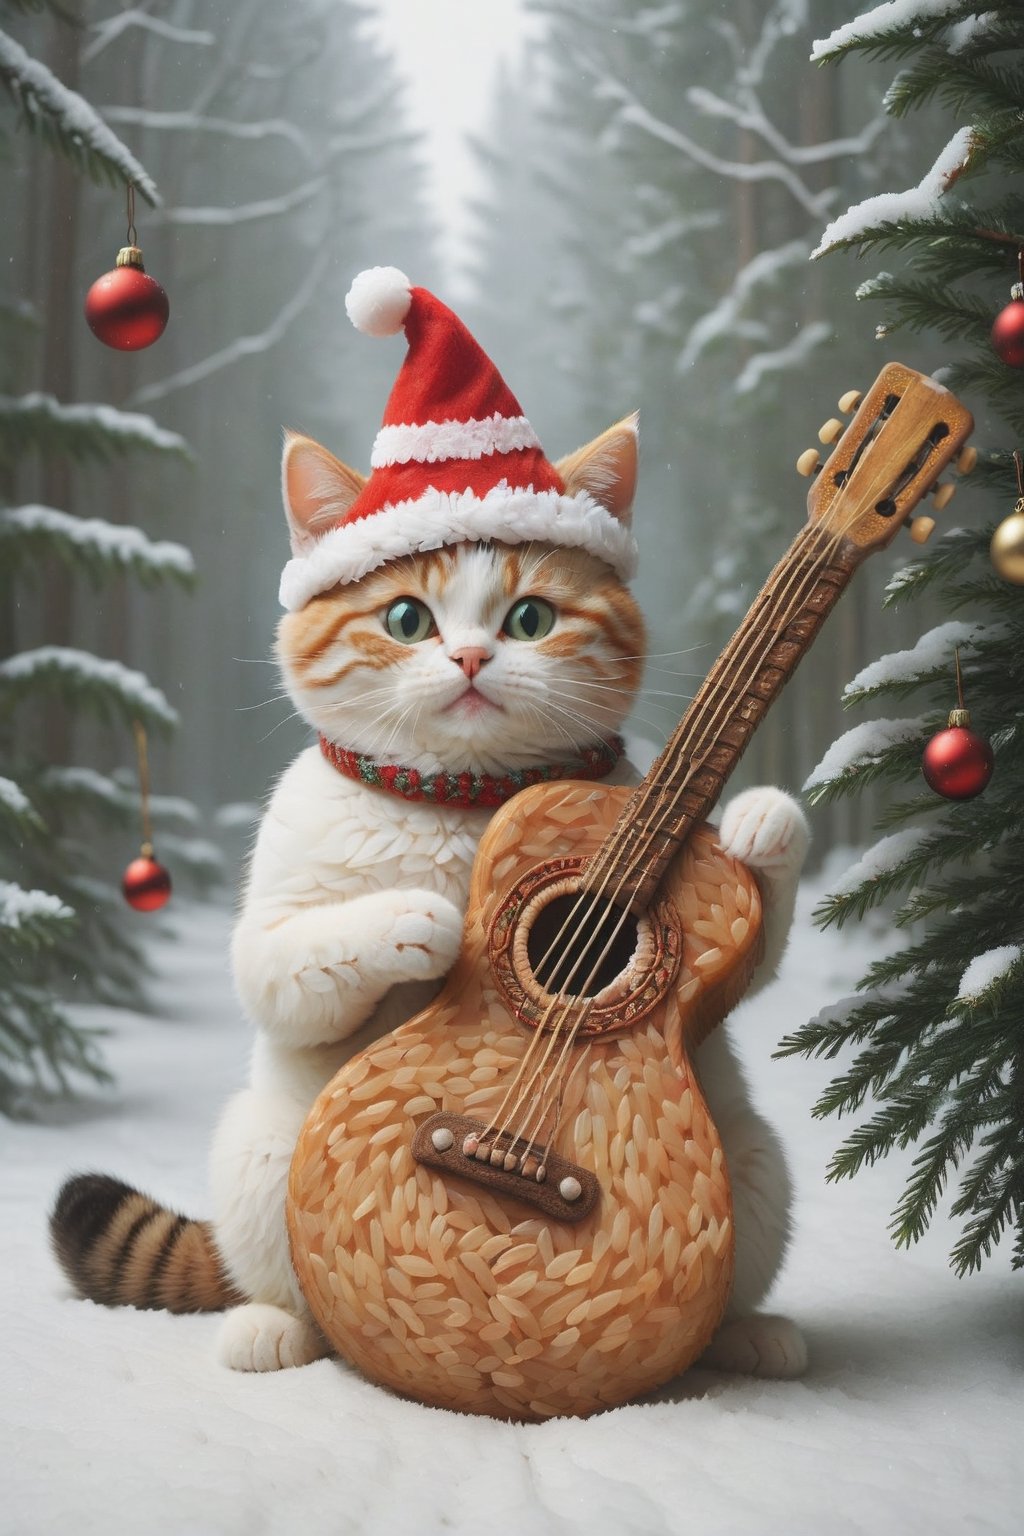 a cool and charismatic cat, donning a festive Christmas hat, BREAK, skillfully strumming a styr guitar while entertaining passersby in a lively forest. The cat's playful expression and rhythmic paw movements exude a natural musical talent, captivating the audience with its melodic tunes.